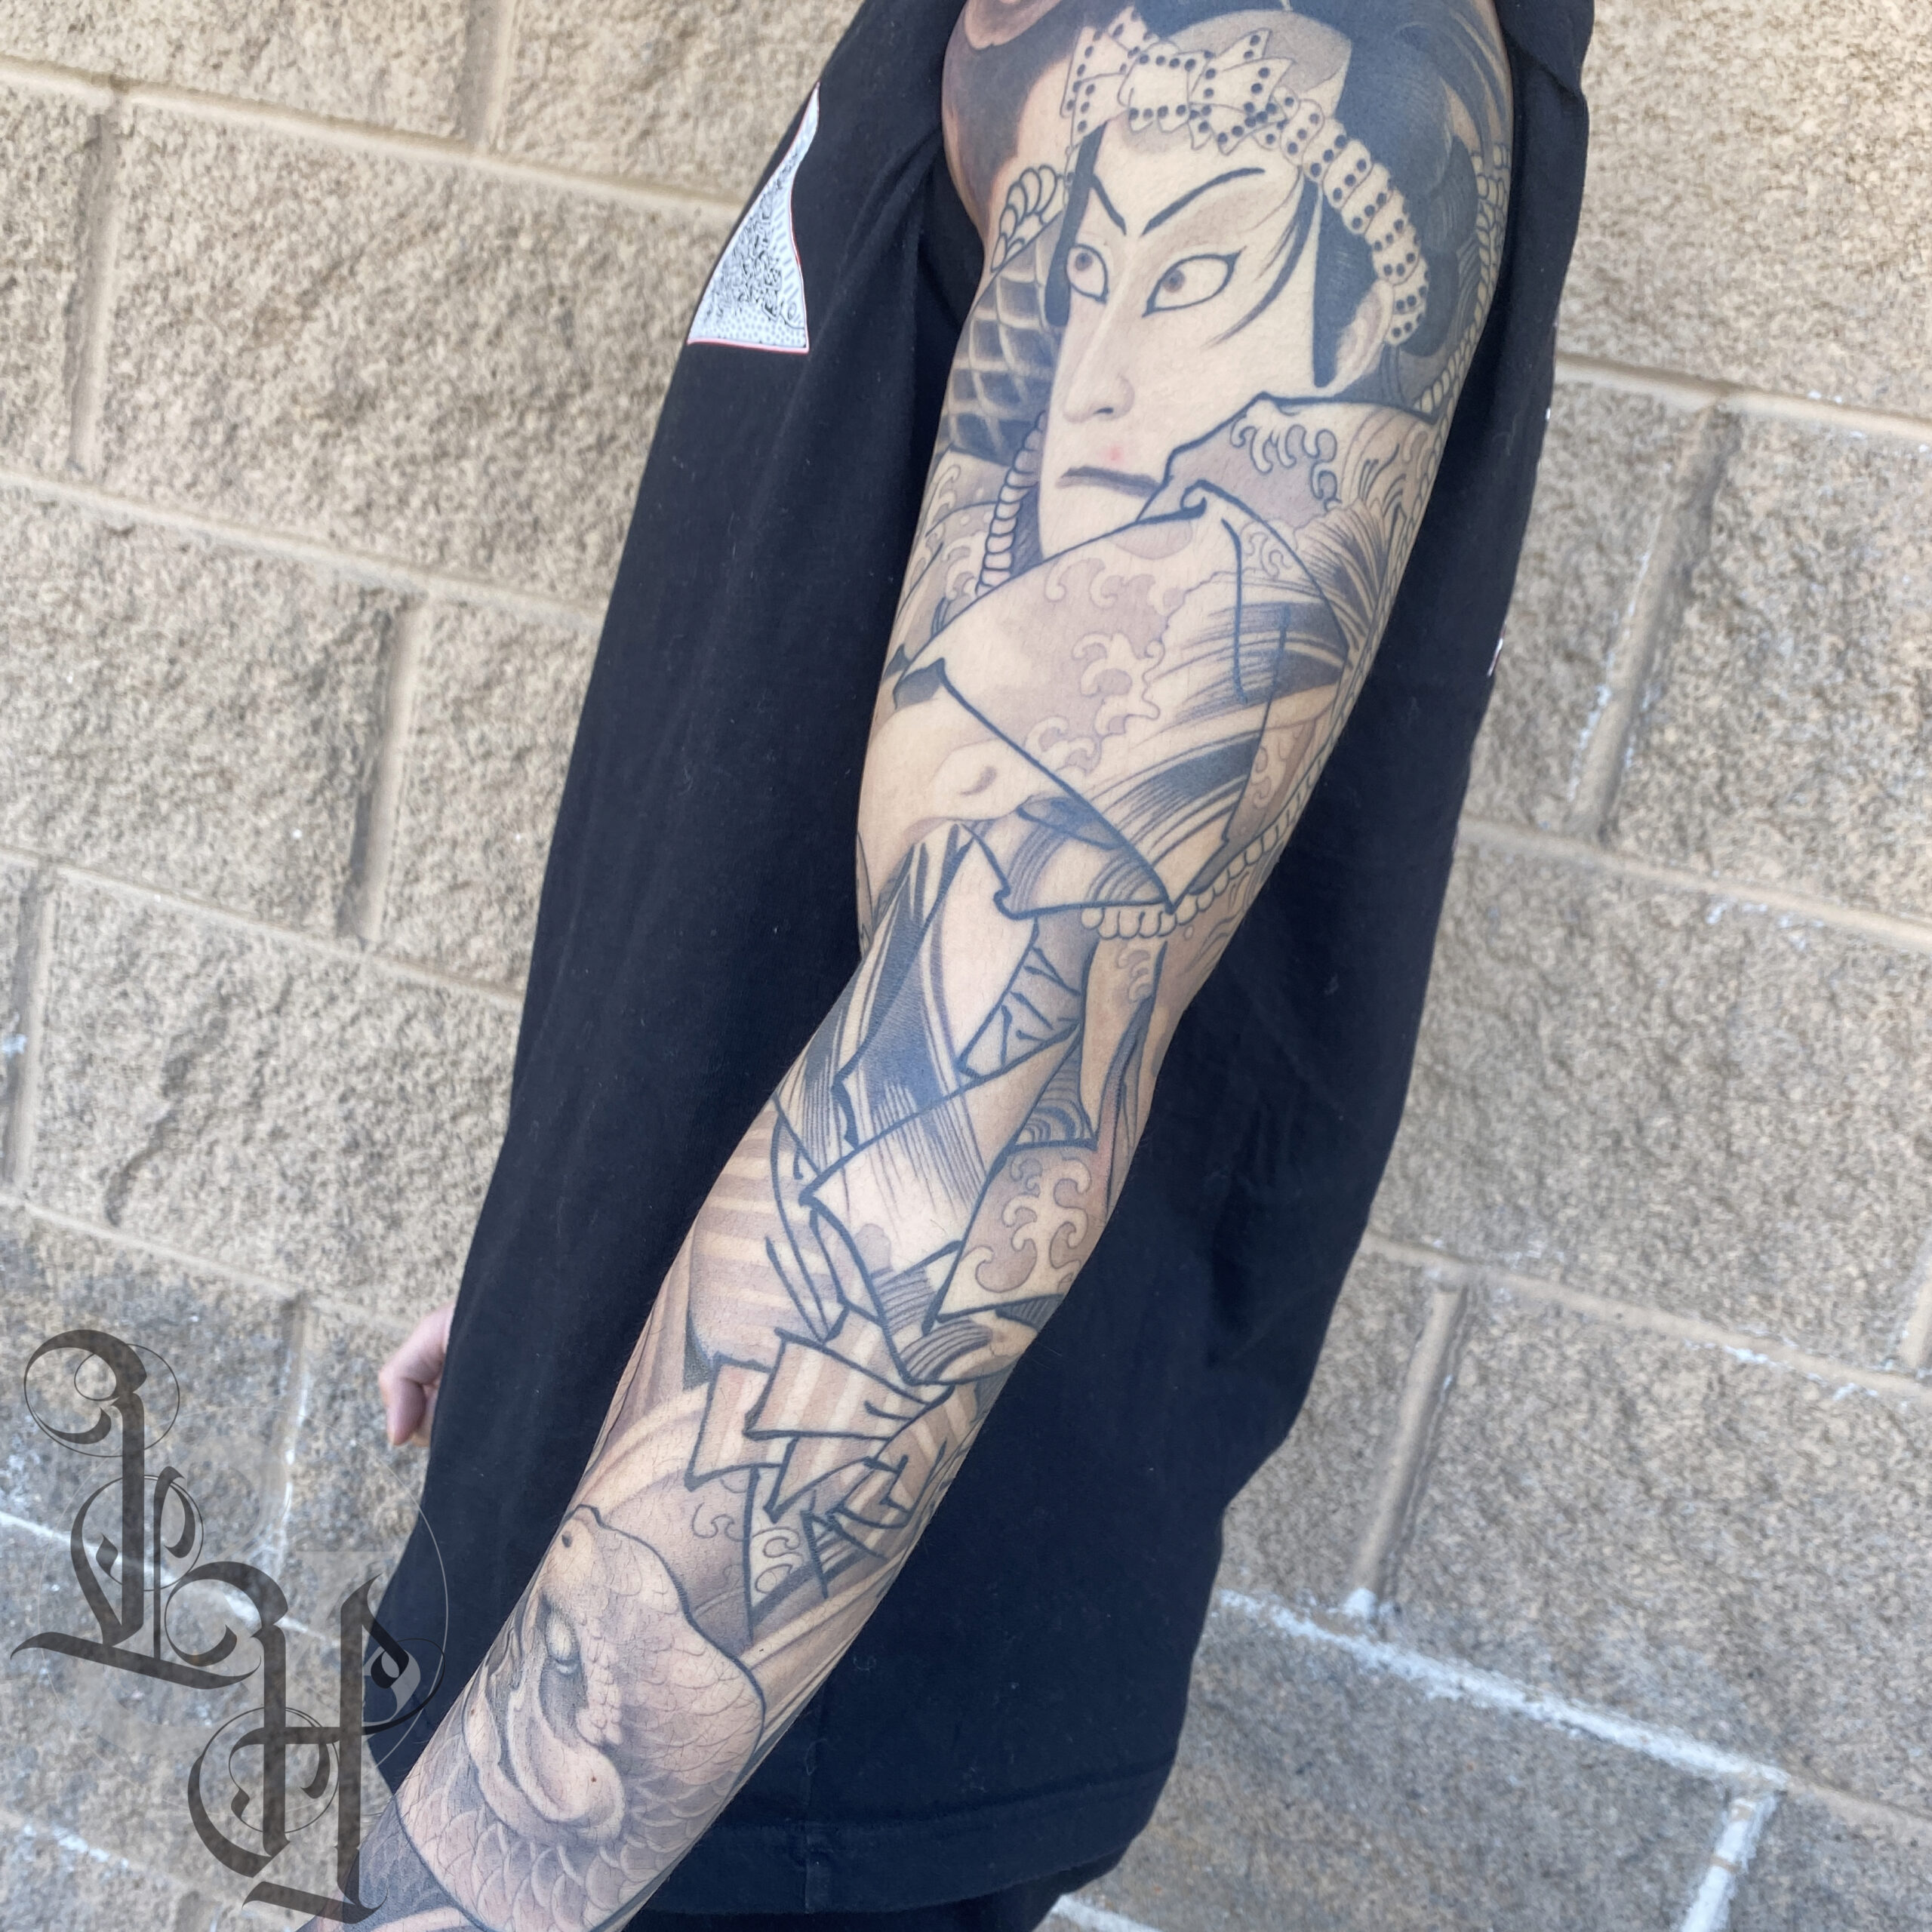 165 Cool Sleeve Tattoos For Men in 2023